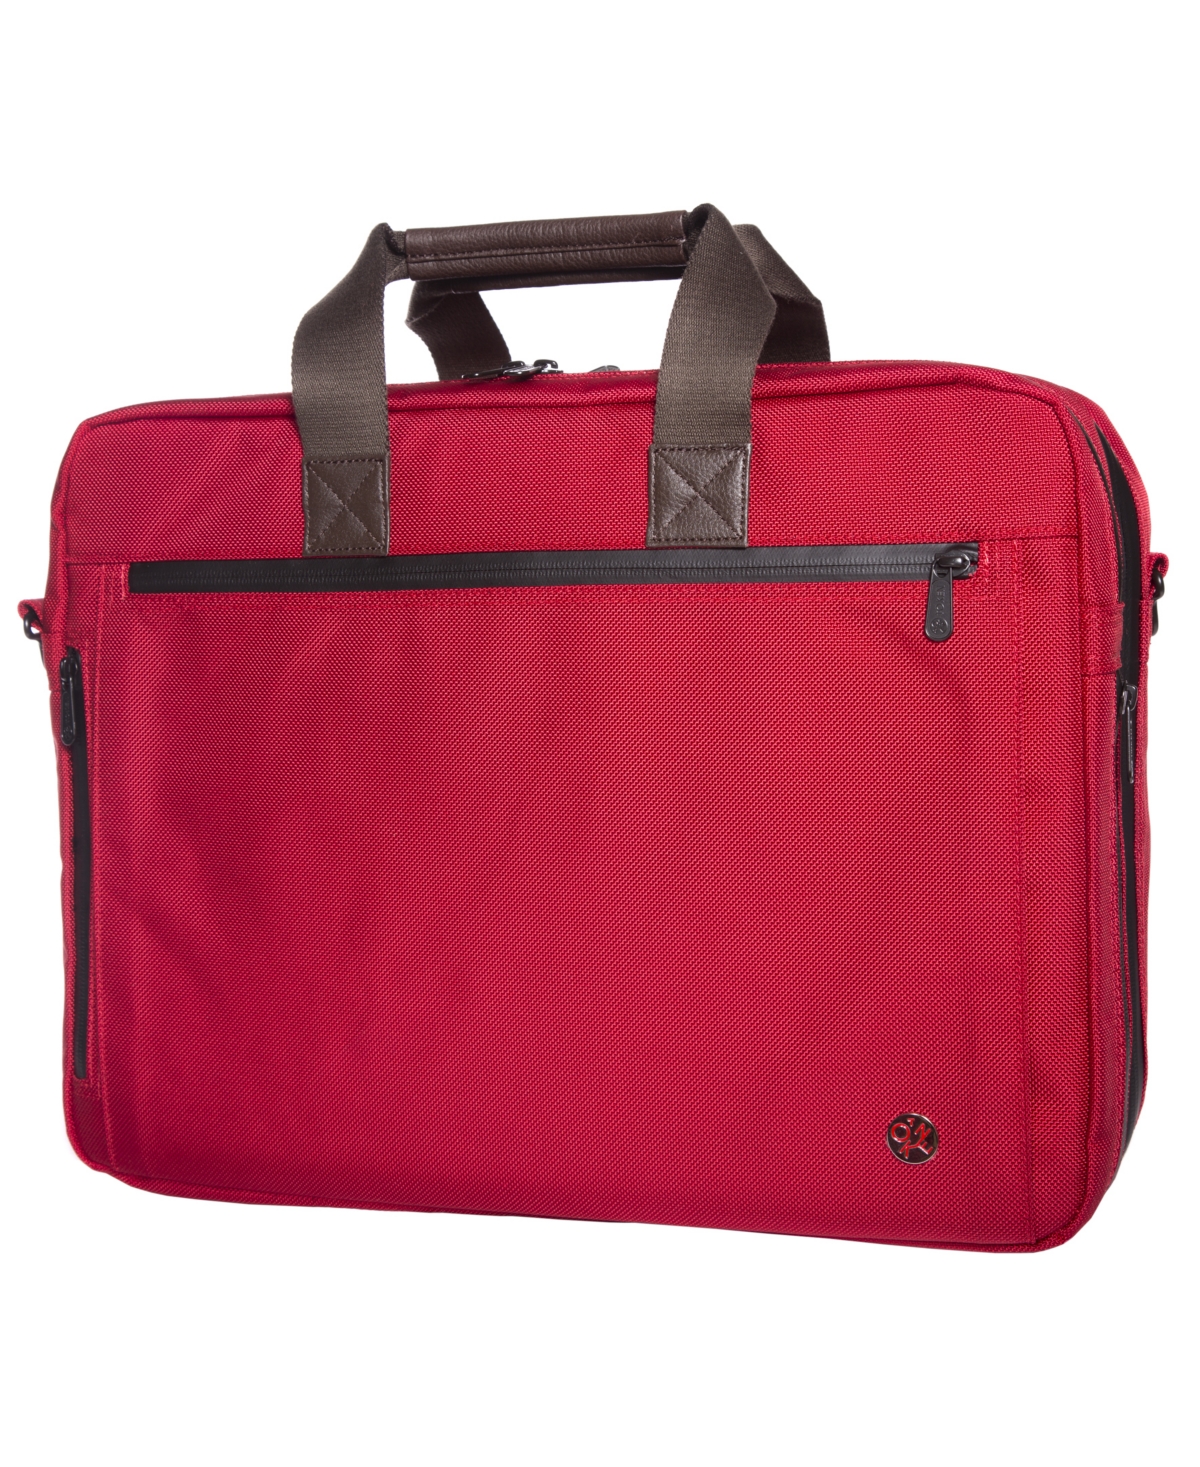 Lawrence Large Laptop Bag with Back Zipper - Red